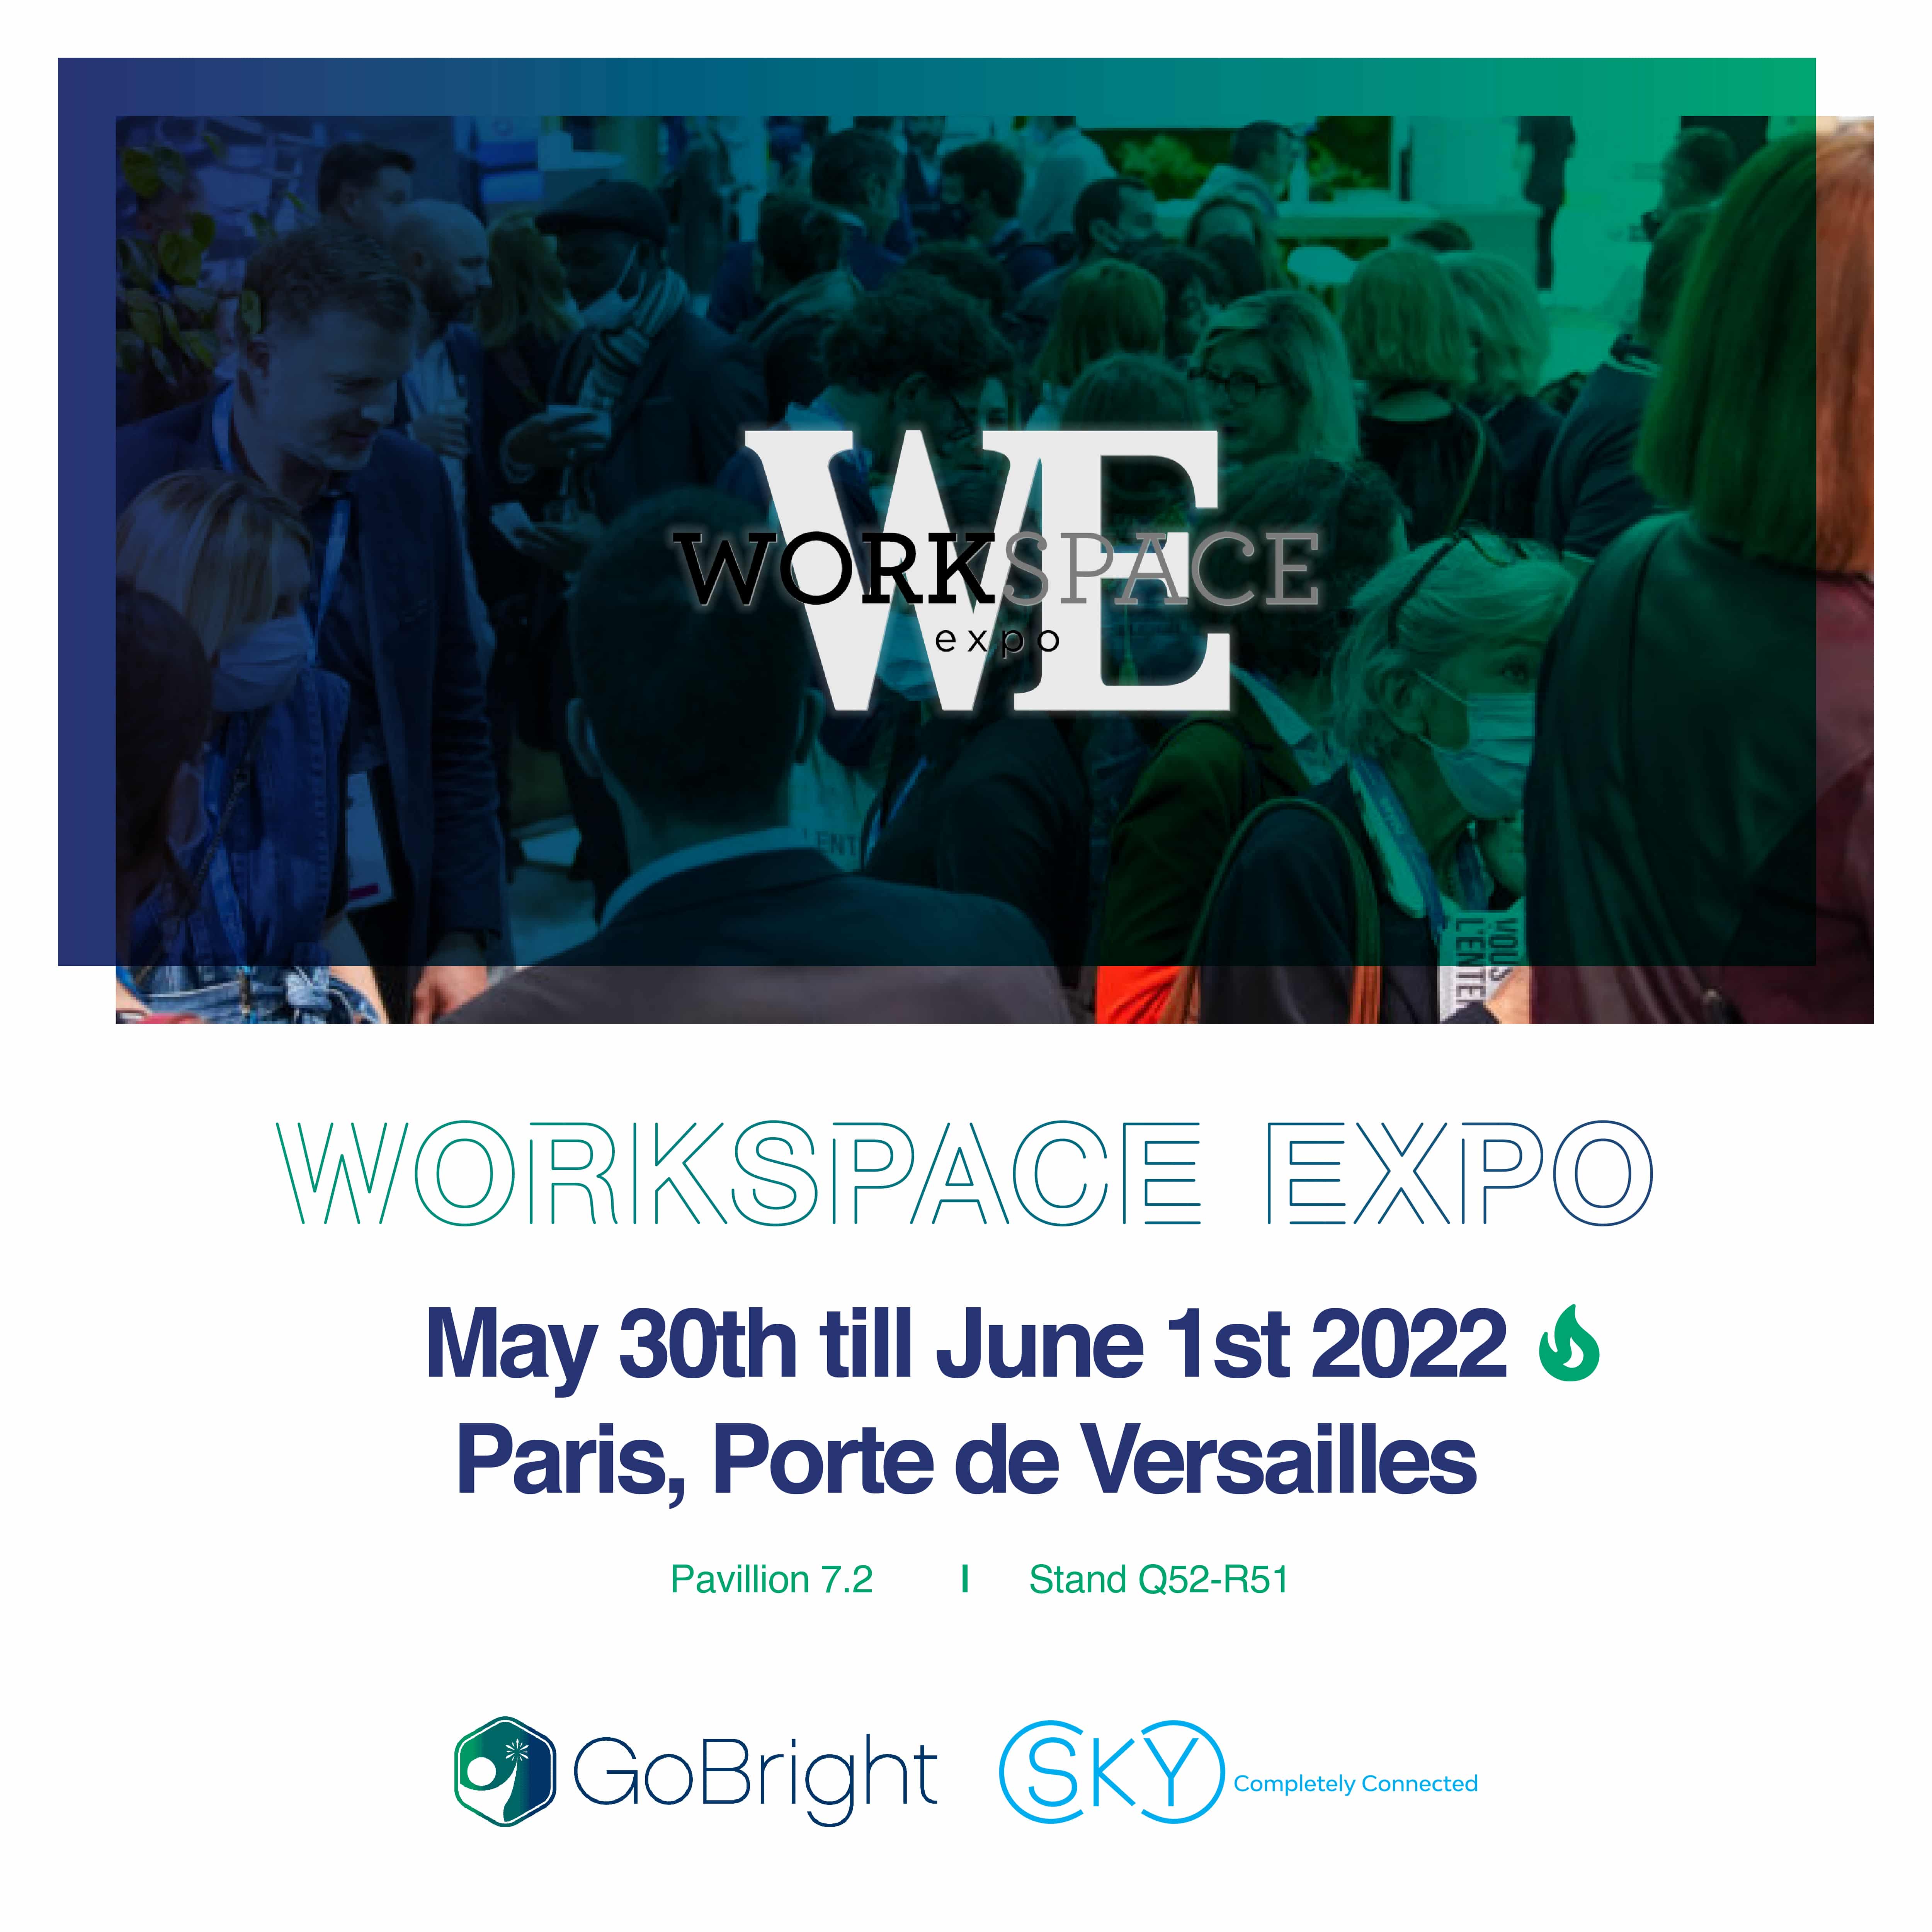 GoBright aux expositions Workspace Expo 2022 